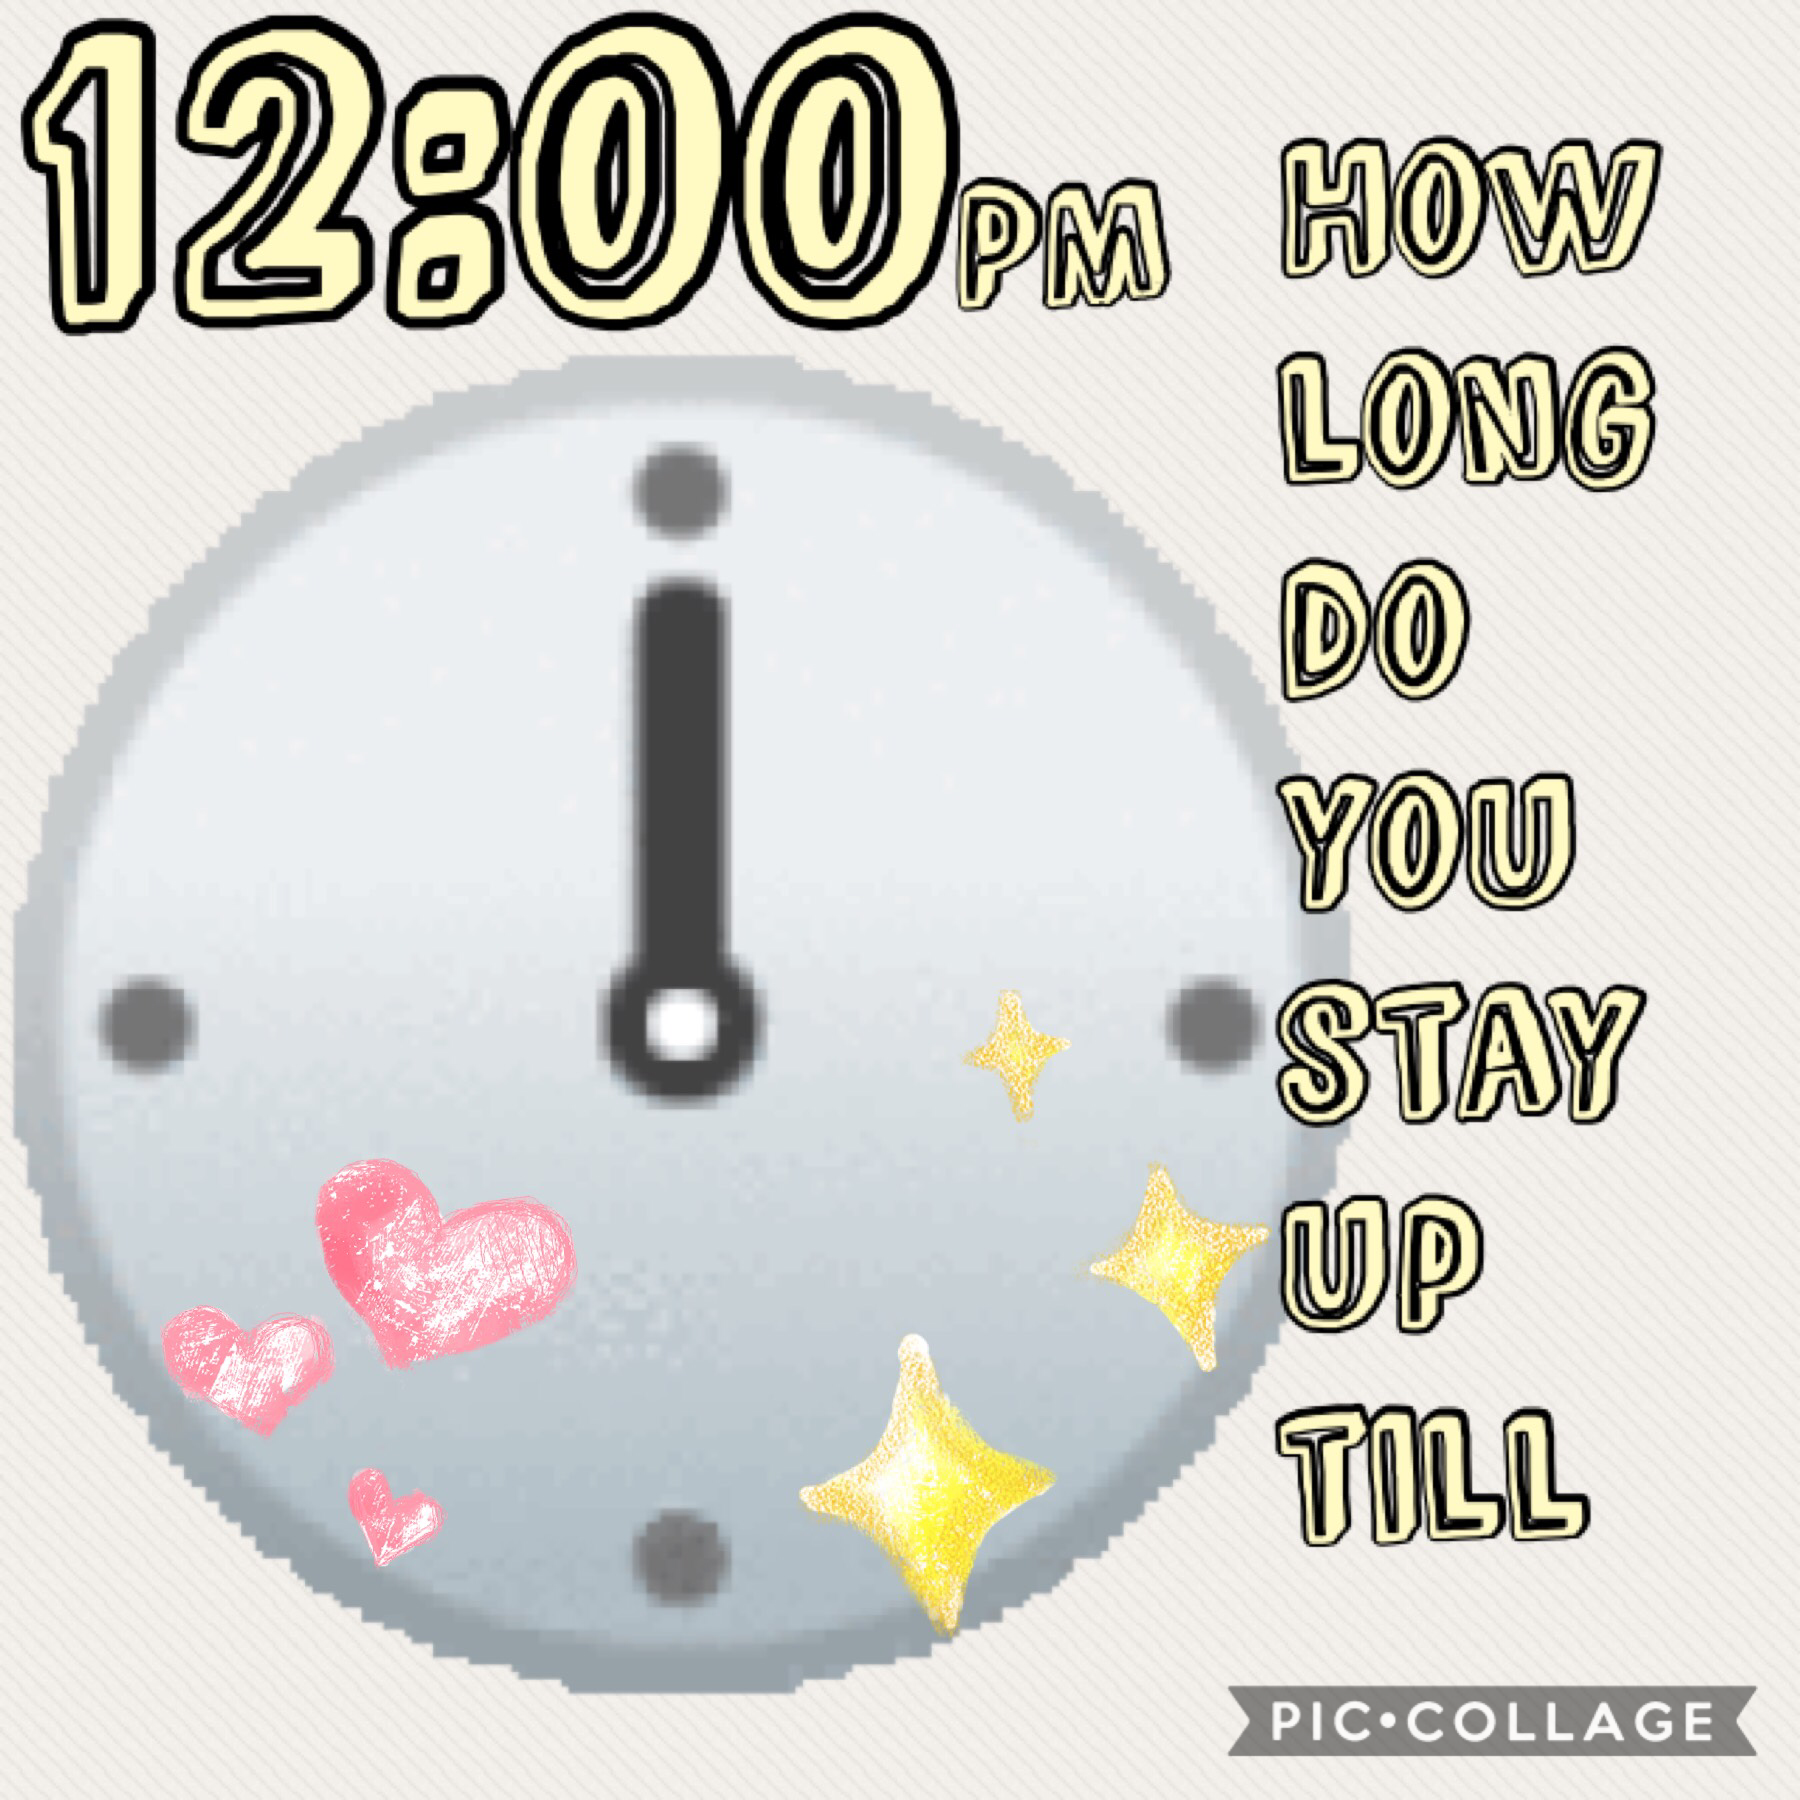 How long do you stay up till?